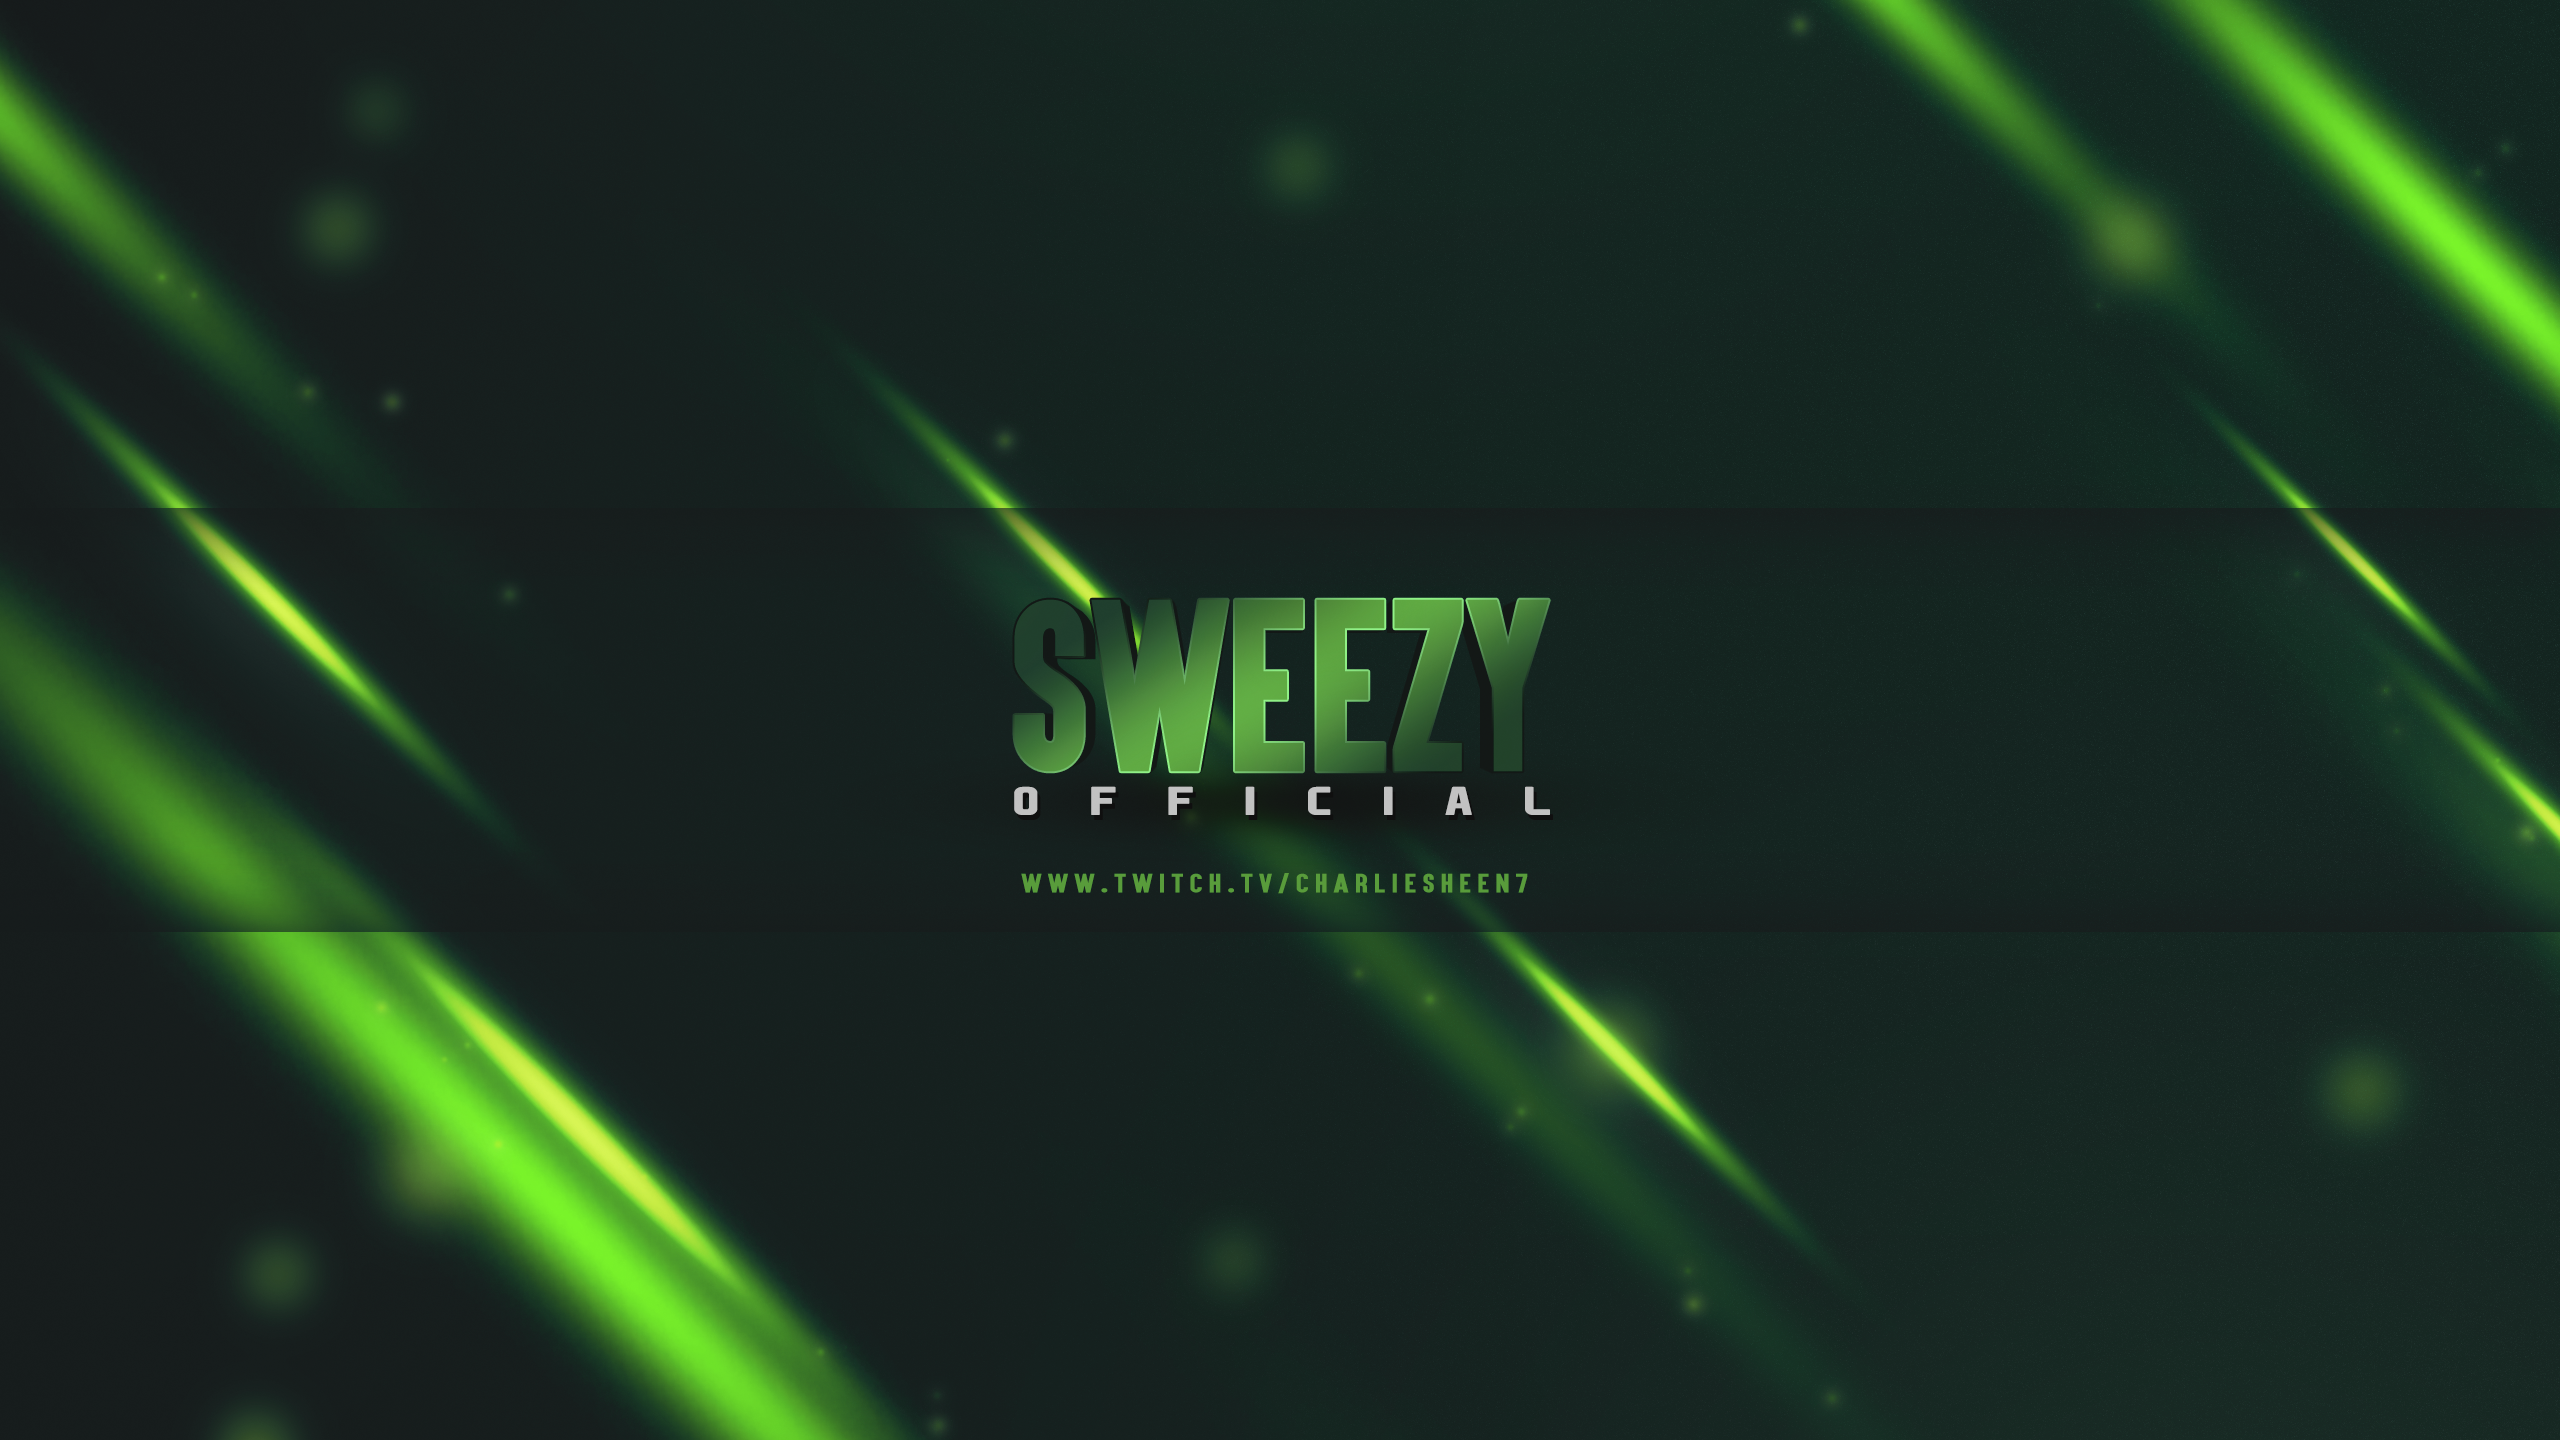 YouTube profile background - Sweezy by AliveNOOB on DeviantArt